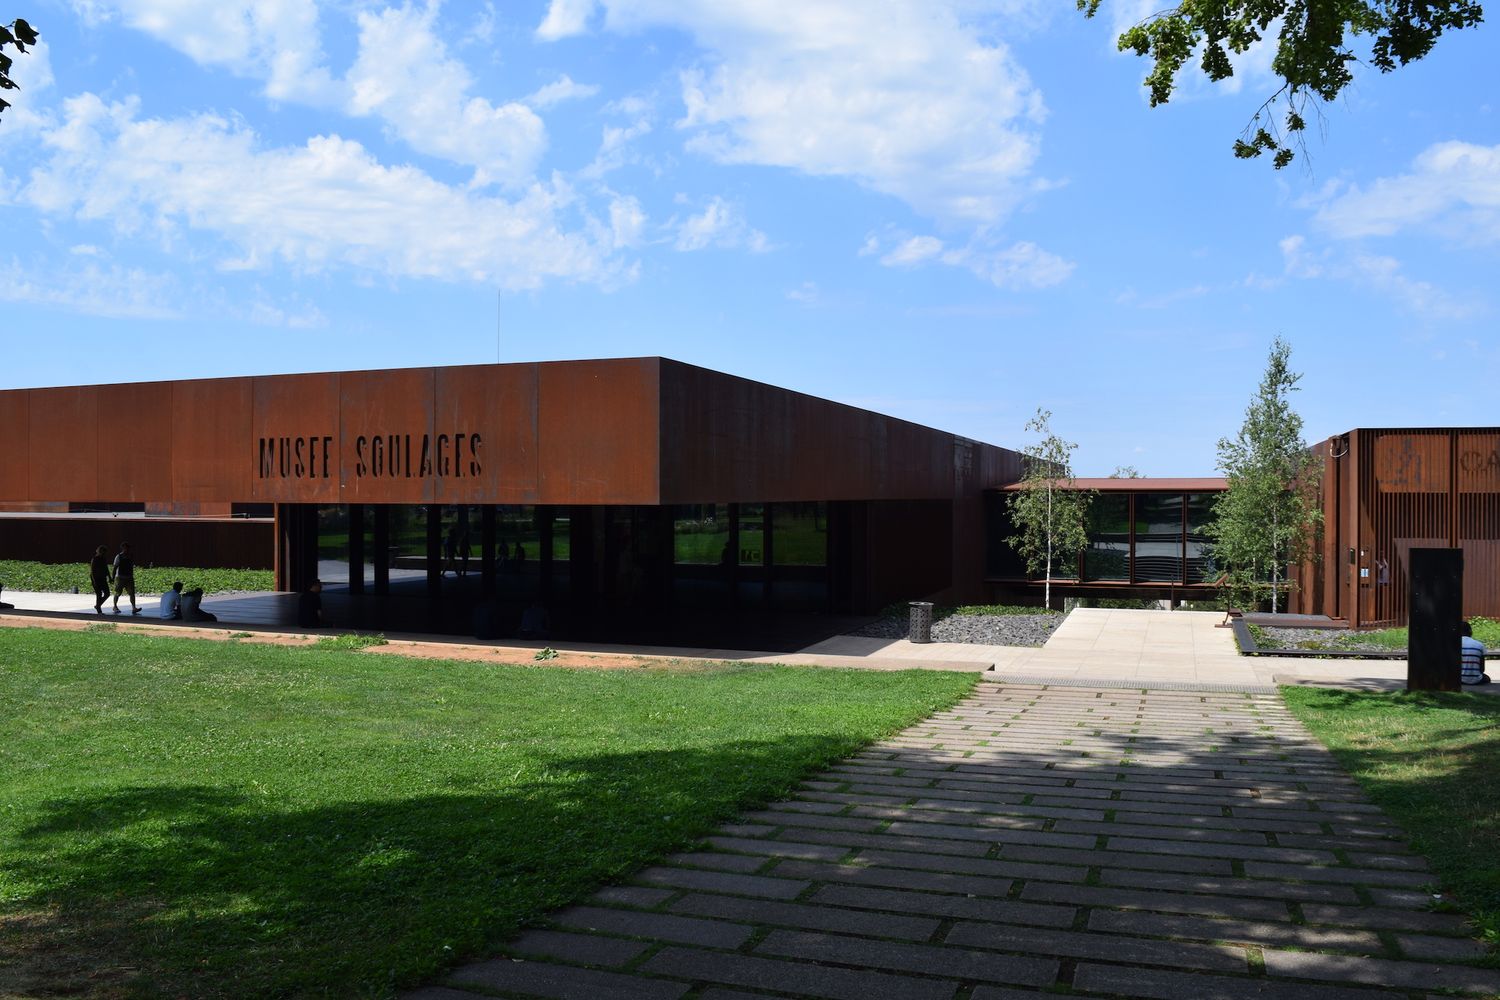 Visit the Musée Soulages in Rodez